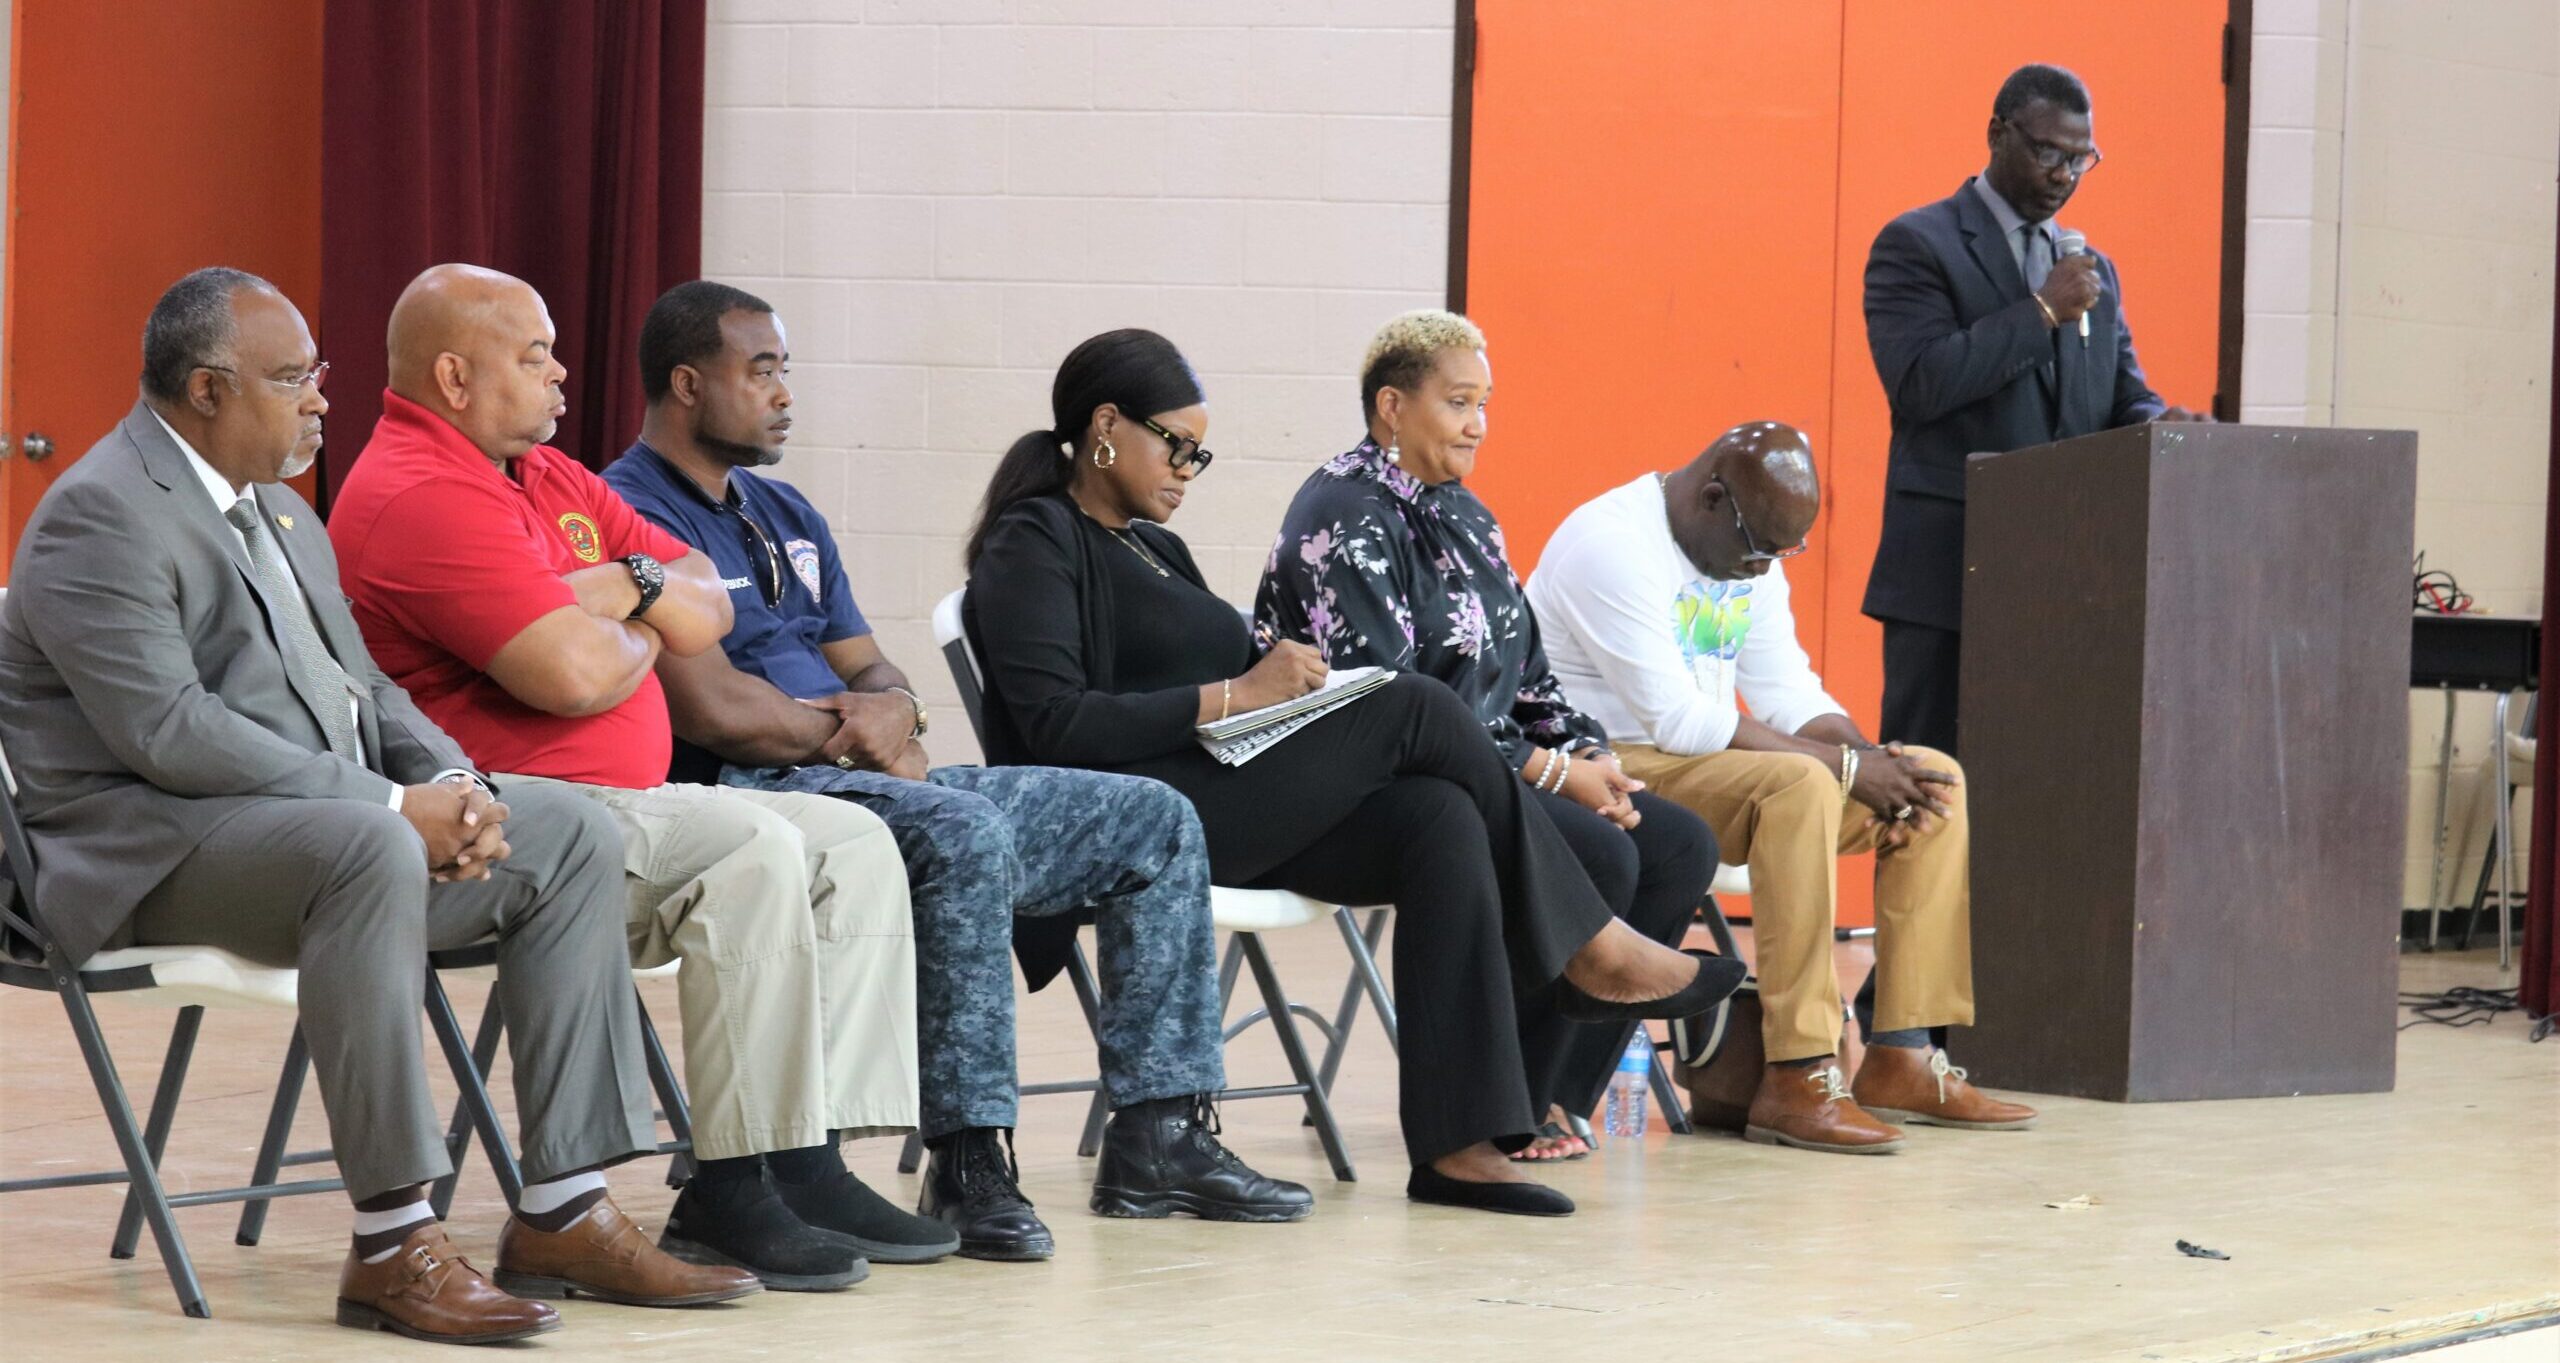 John H. Woodson Jr. High School Principal Henry Mark addresses parents at a meeting held at the school on Friday to provide updates following a BB gun shooting incident on Thursday. From left are Police Commissioner Ray Martinez, Office of Gun Violence Prevention Executive Director Antonio Emanuel, St. Croix District School Safety Manager Jaime Roebuck Sr., St. Croix District Deputy Superintendent Karen Chancellor, Education Commissioner Dionne Wells-Hedrington, and VIDE Director or Disaster Planning and School Security Irvin Mason. (Photo courtesy V.I. Education Department)